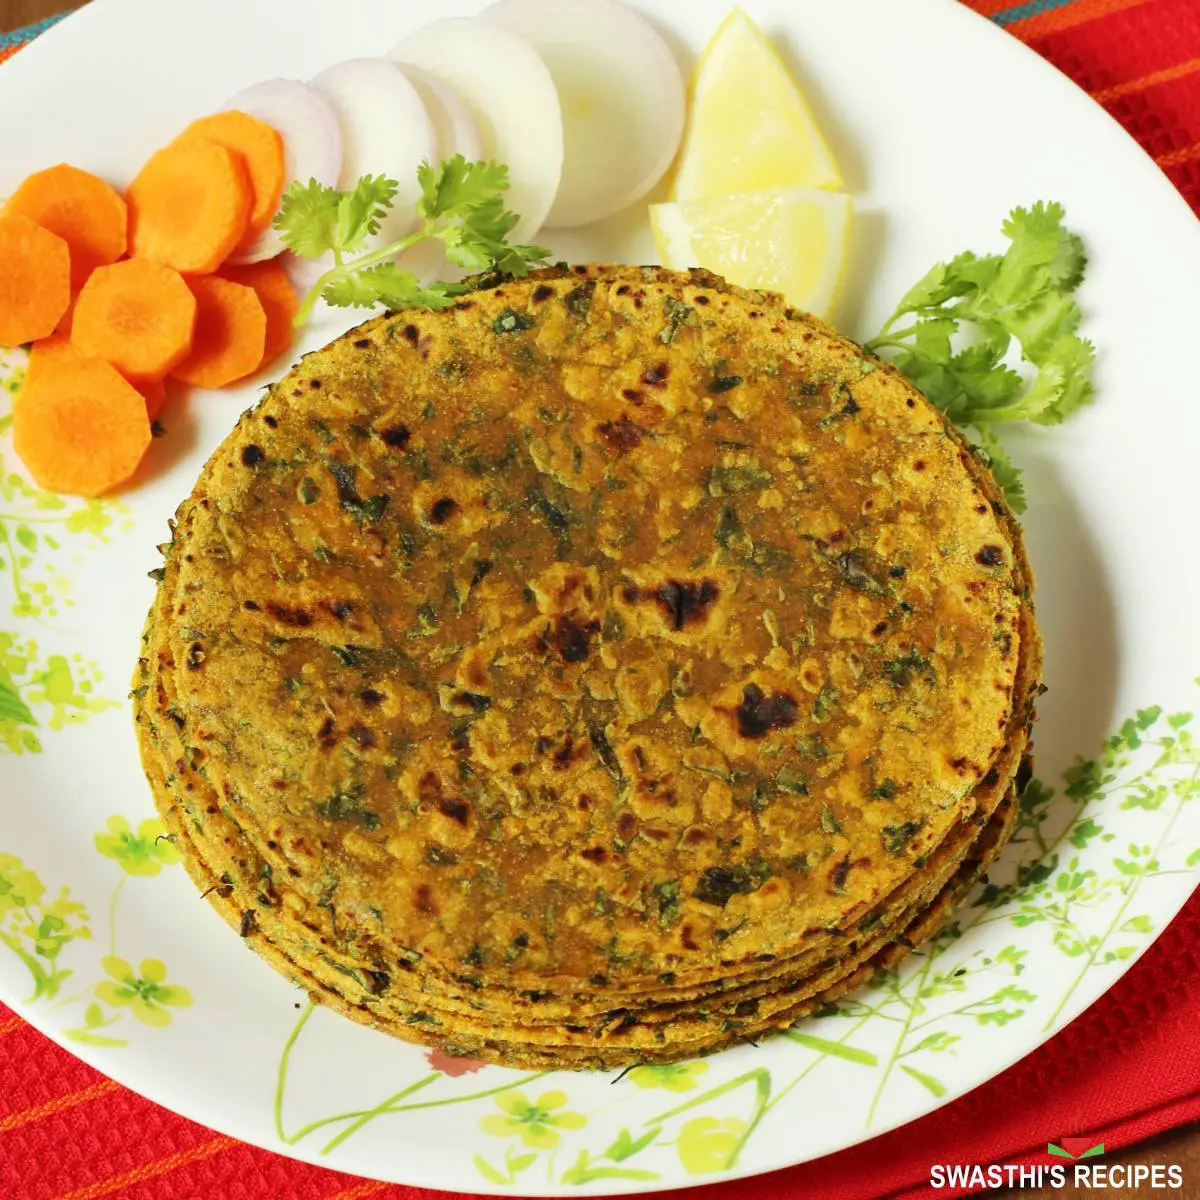 Thepla recipe made with whole grain flour, spices, methi leaves and herbs